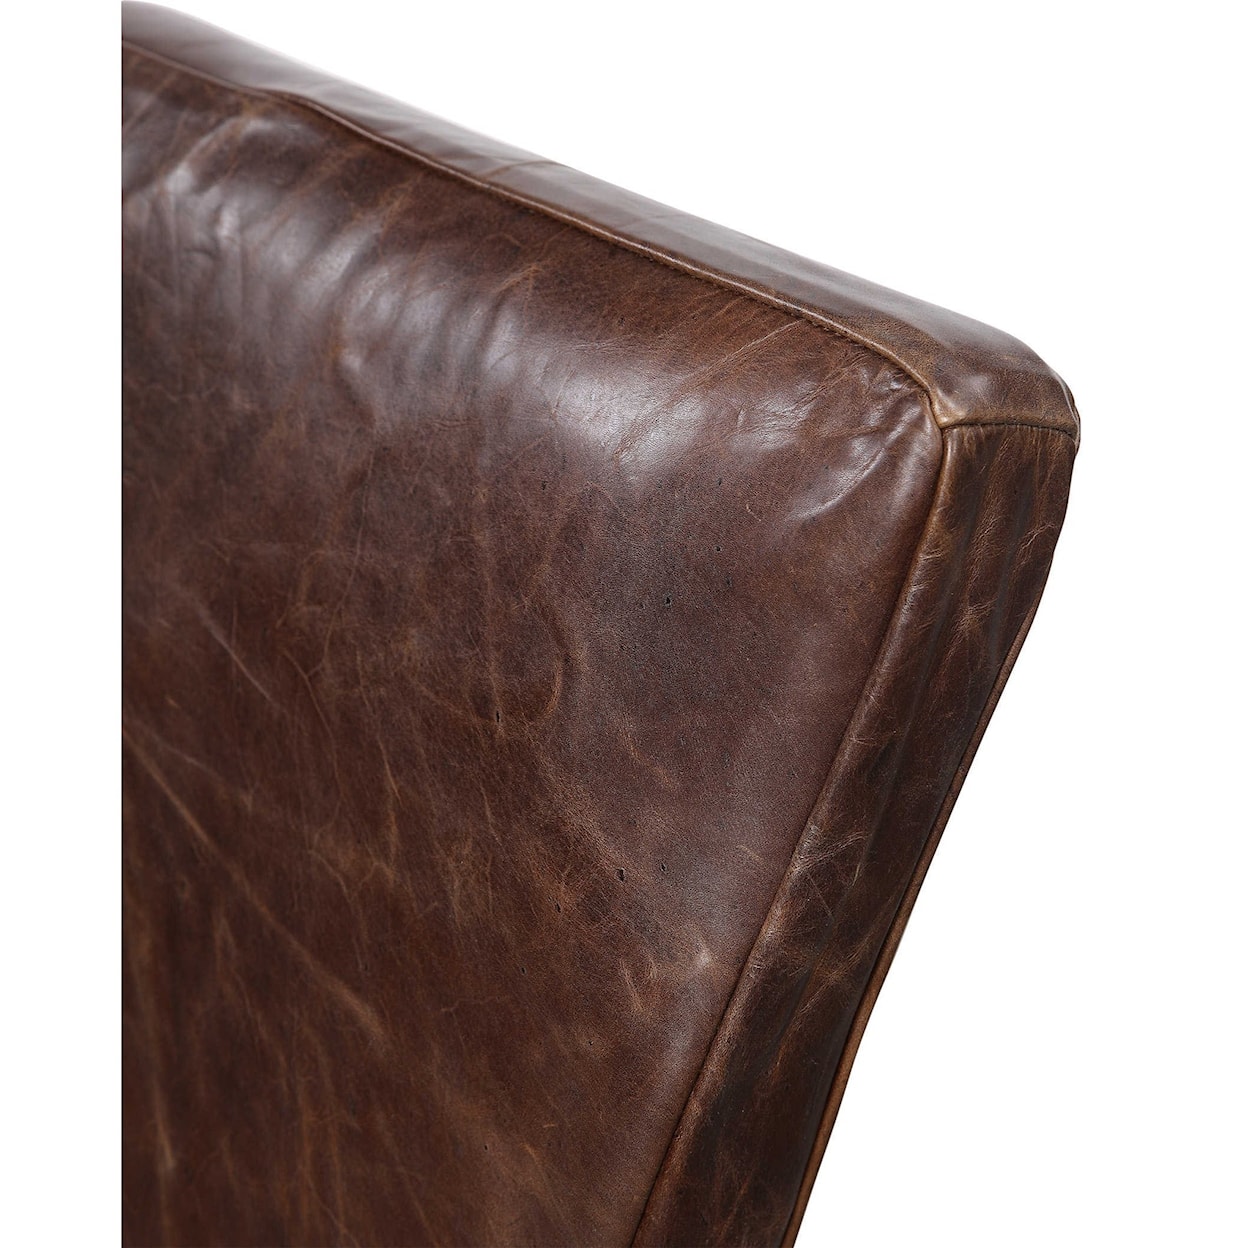 Uttermost Accent Furniture - Accent Chairs Oaklyn Armless Chair